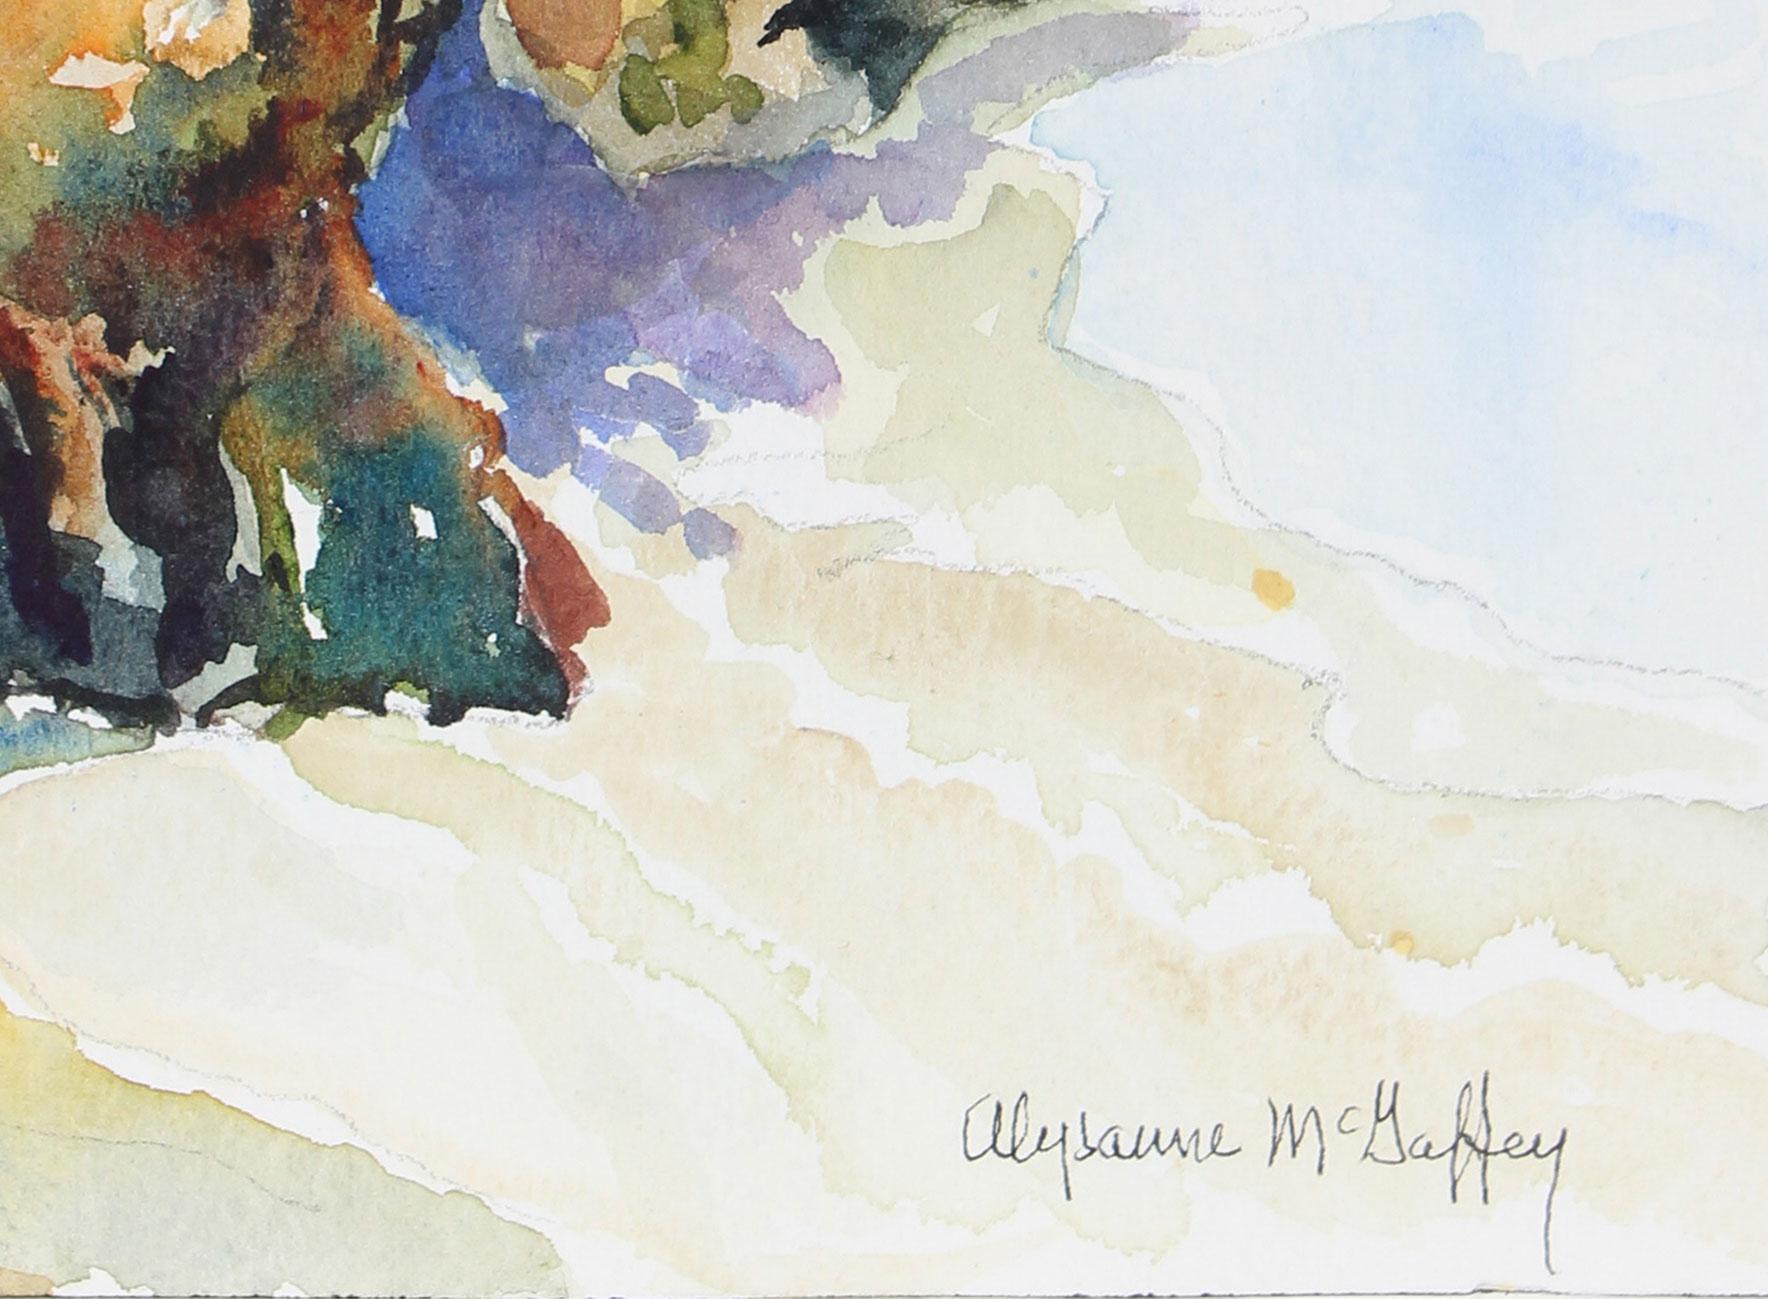 20th Century Northern California Seascape in Watercolor  - Art by Alysanne McGaffey